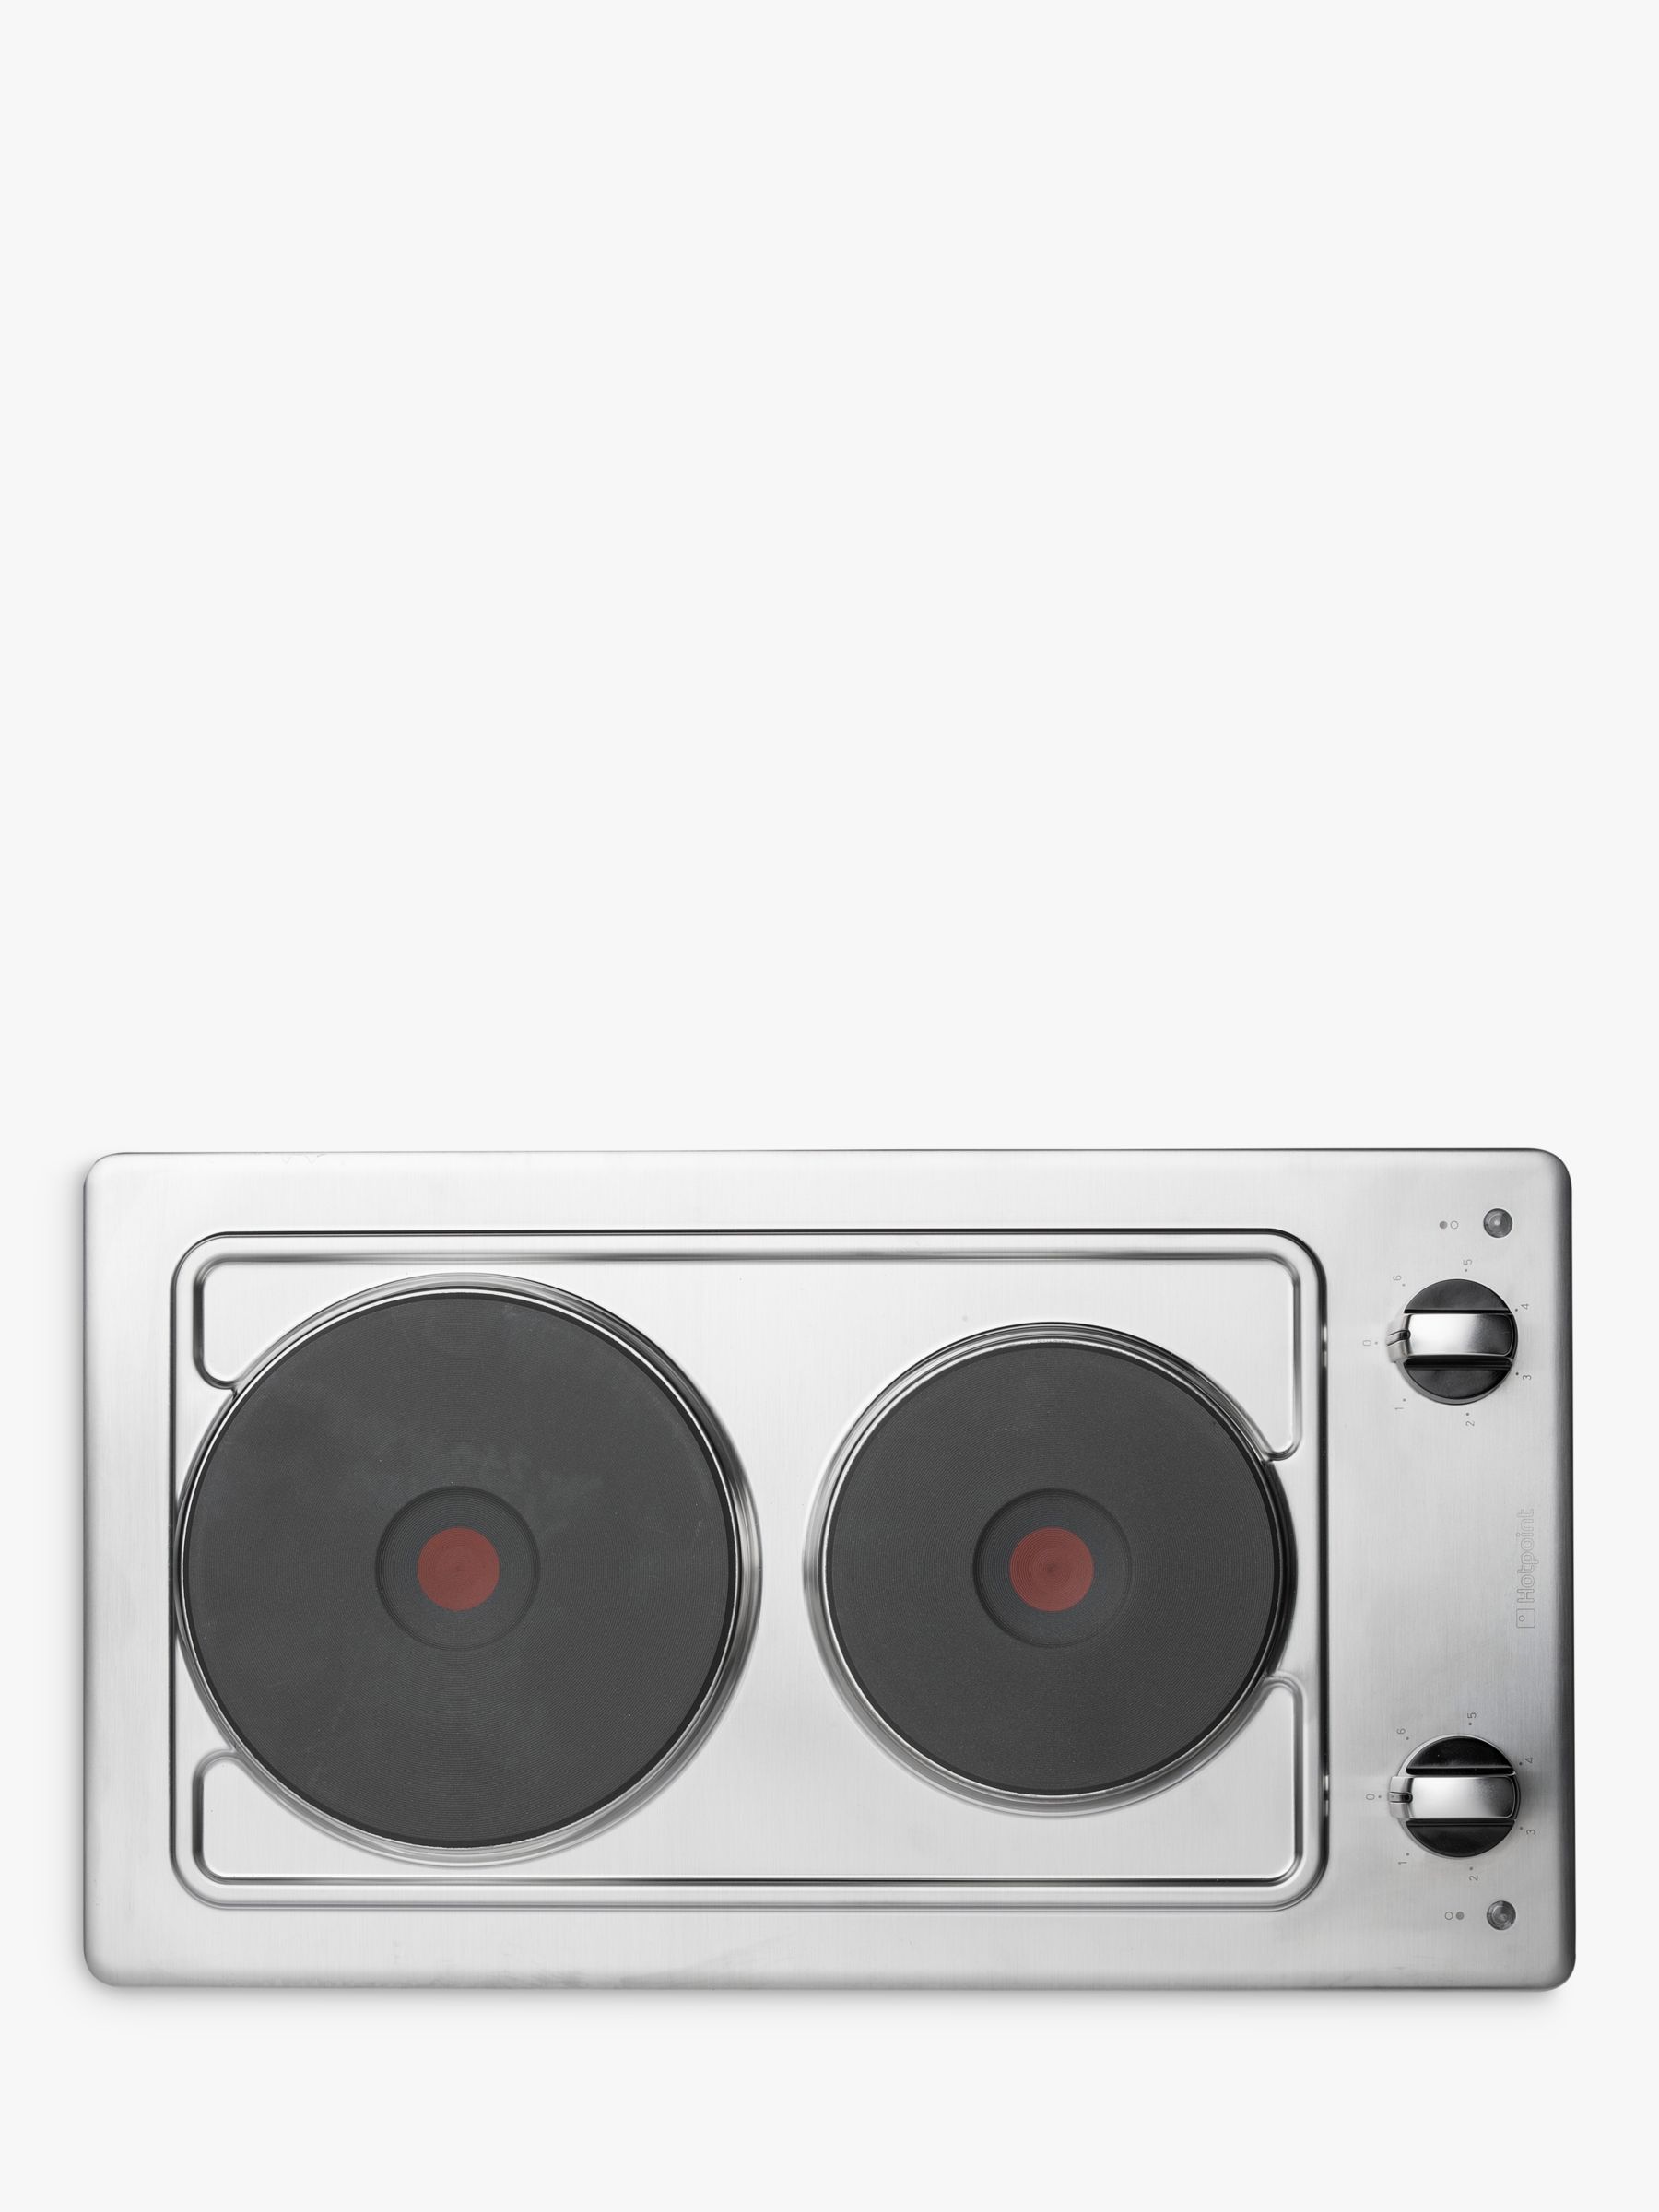 Hotpoint E320SKIX Electric Hob, Stainless Steel